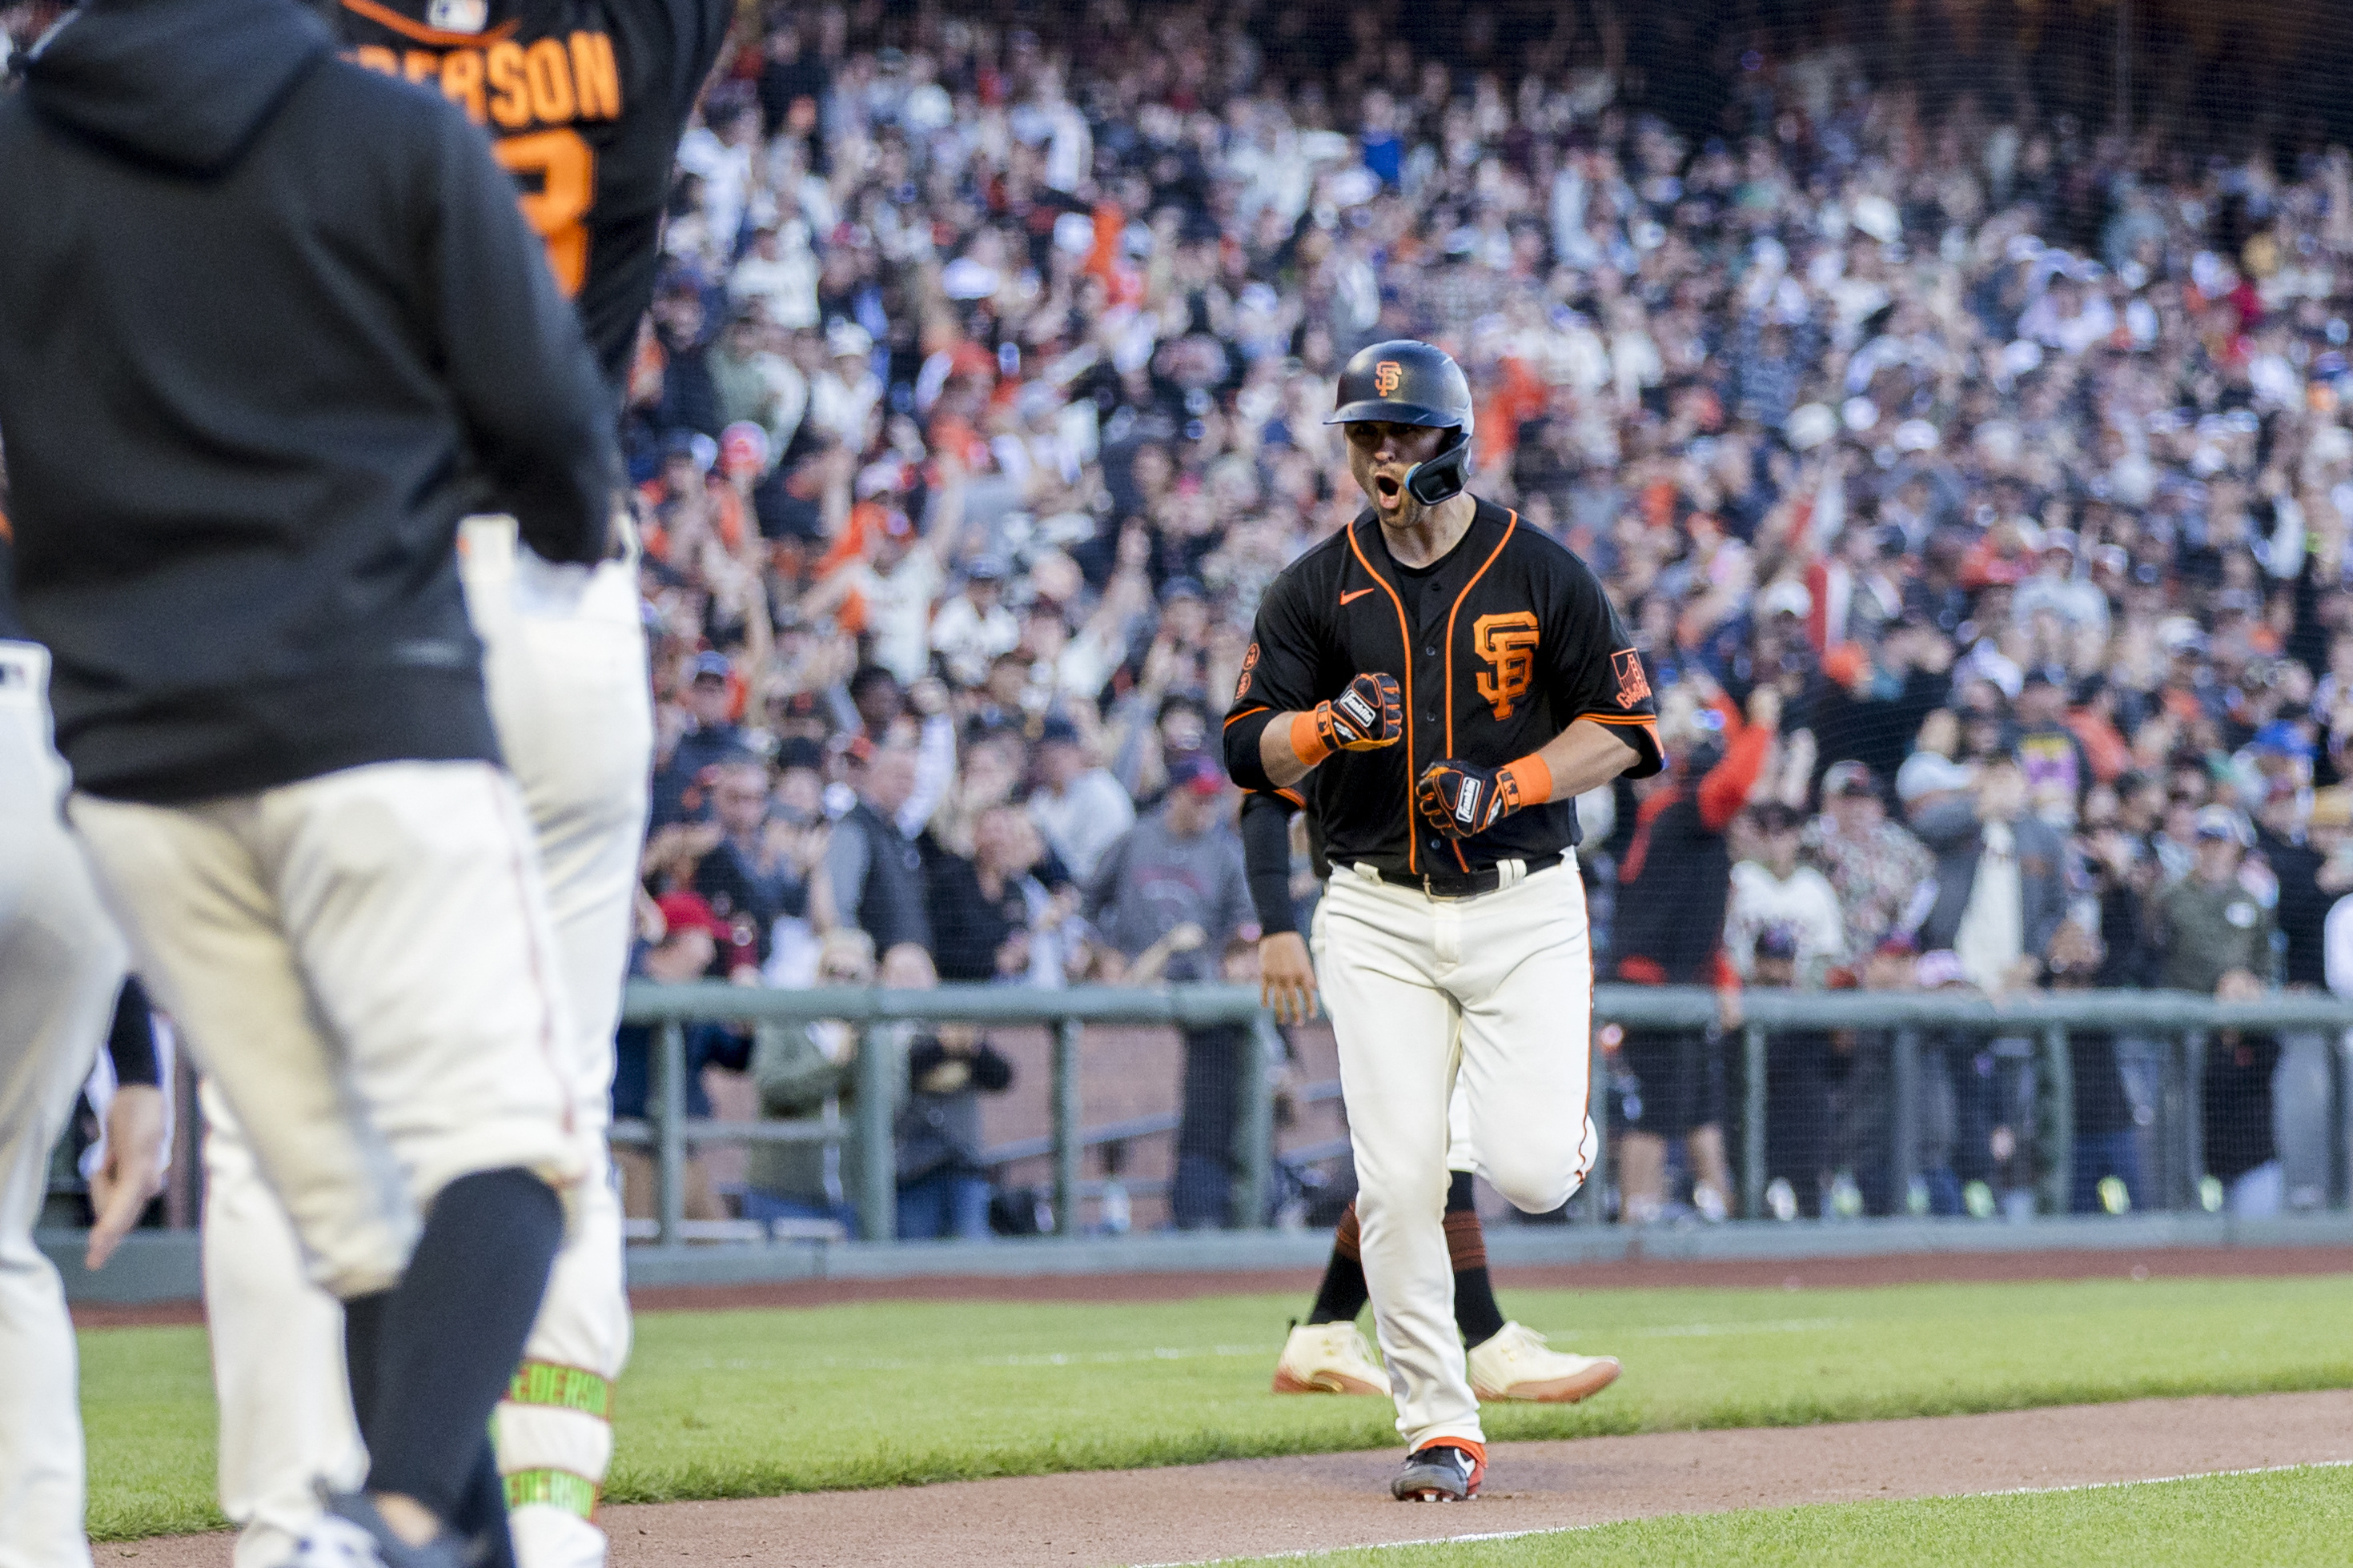 World Series: Giants Take 3-0 Lead Over Tigers - The New York Times